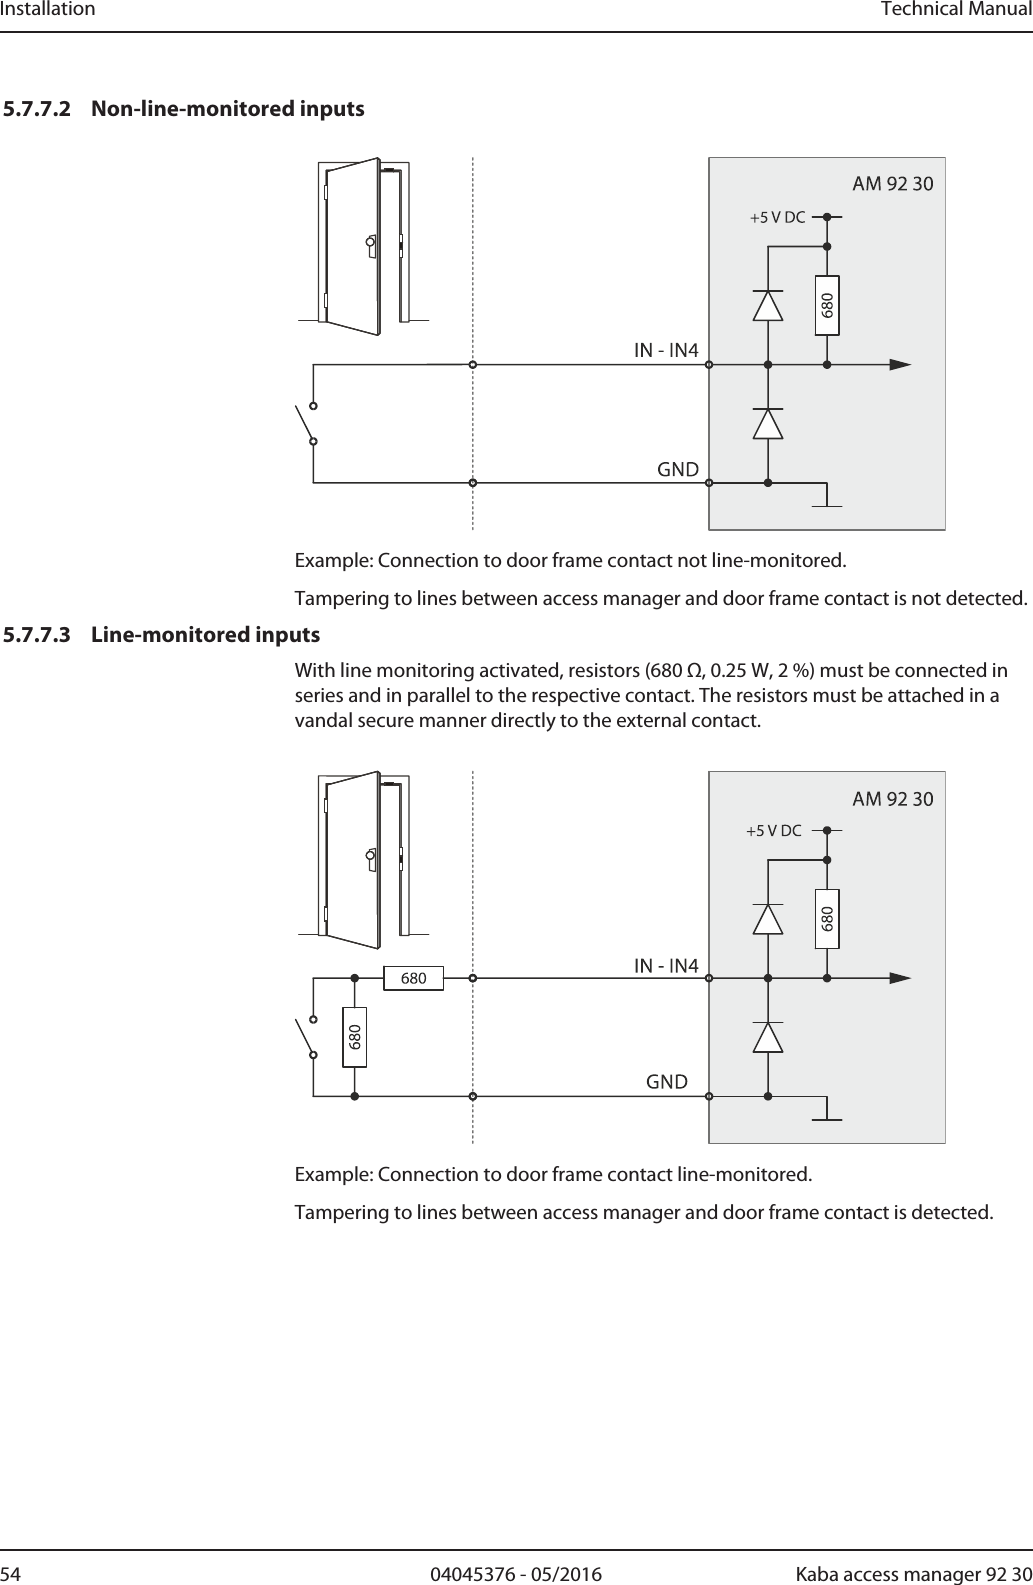 Installation Technical Manual54 04045376 - 05/2016 Kaba access manager 92 305.7.7.2 Non-line-monitored inputsExample: Connection to door frame contact not line-monitored.Tampering to lines between access manager and door frame contact is not detected.5.7.7.3 Line-monitored inputsWith line monitoring activated, resistors (680 Ω, 0.25 W, 2 %) must be connected inseries and in parallel to the respective contact. The resistors must be attached in avandal secure manner directly to the external contact.Example: Connection to door frame contact line-monitored.Tampering to lines between access manager and door frame contact is detected.